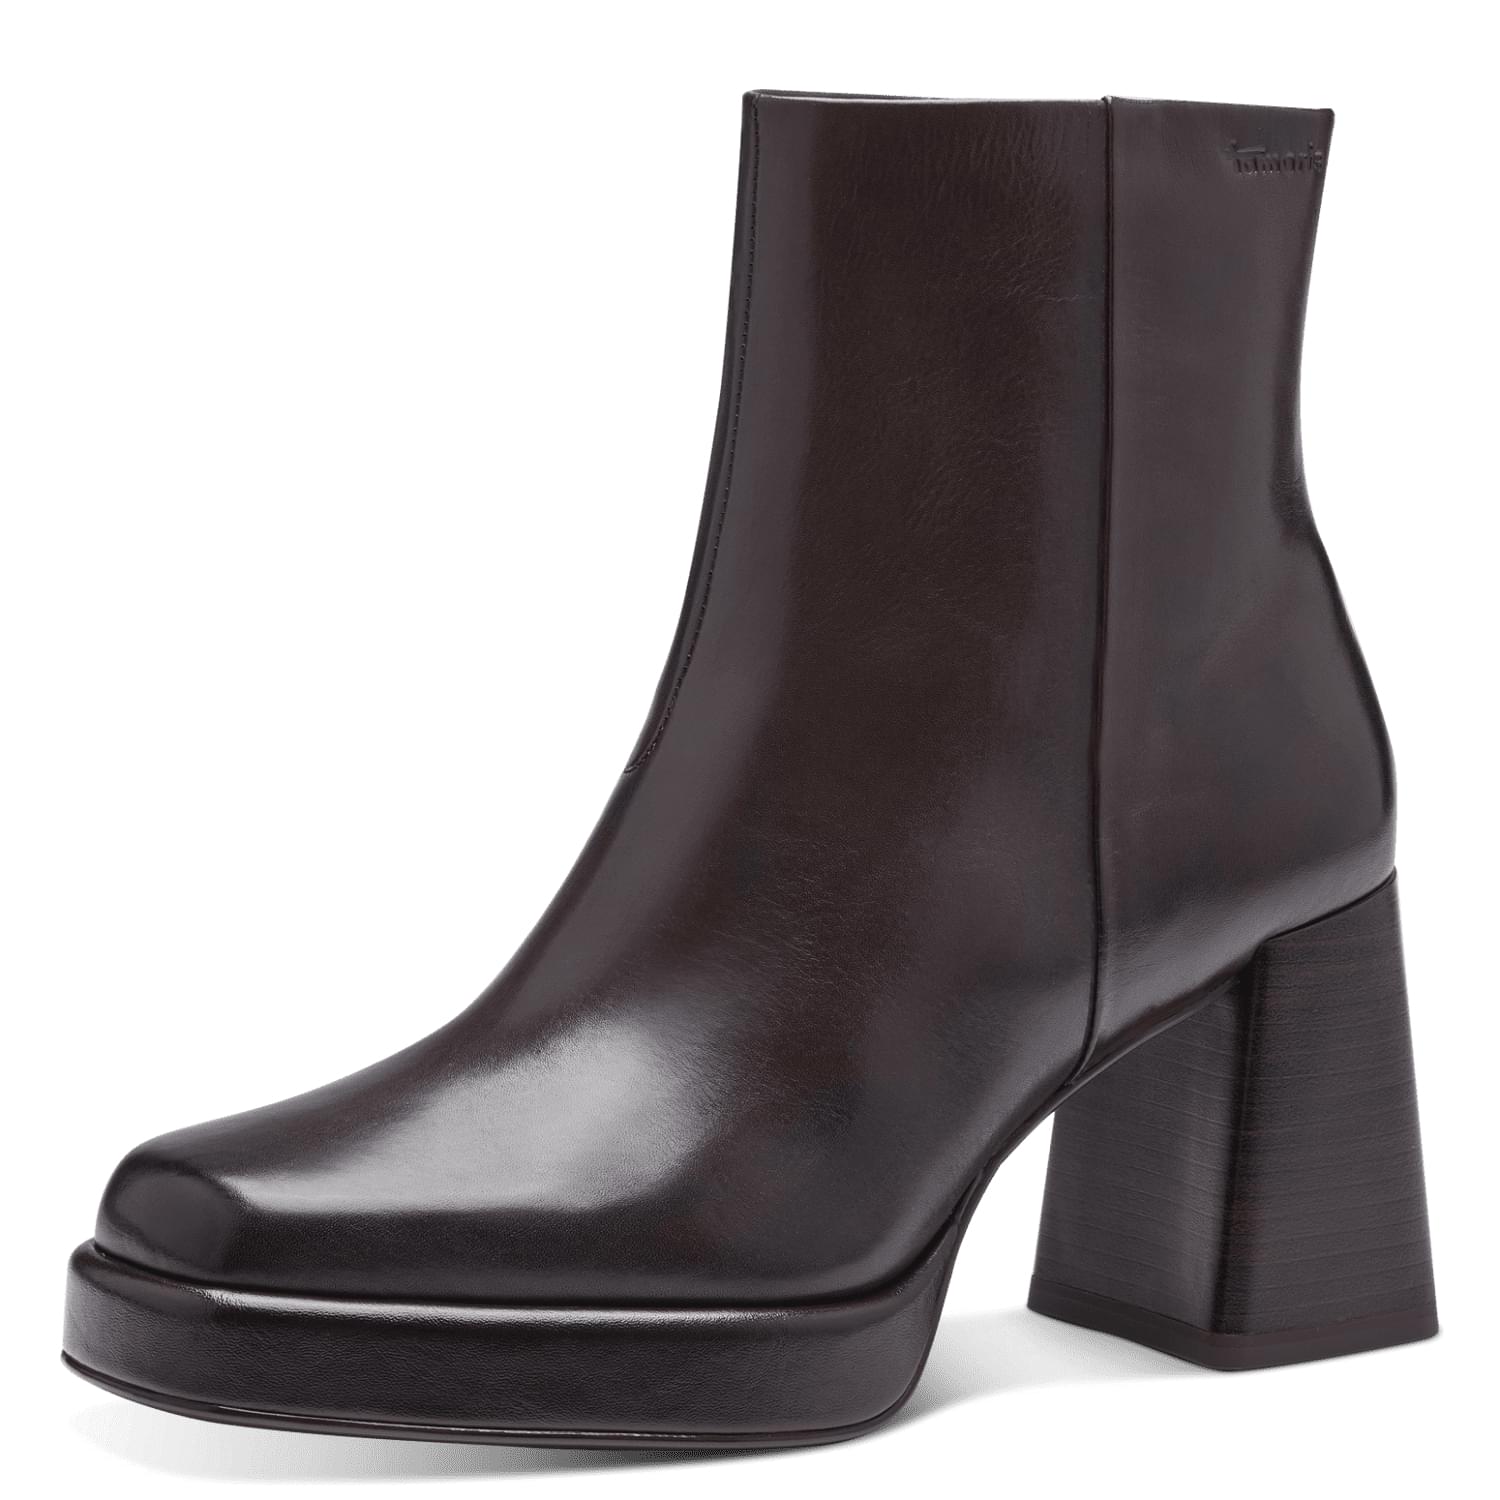 Tamaris Kyria Ankle Boots 1-25362-41 in Mahogany